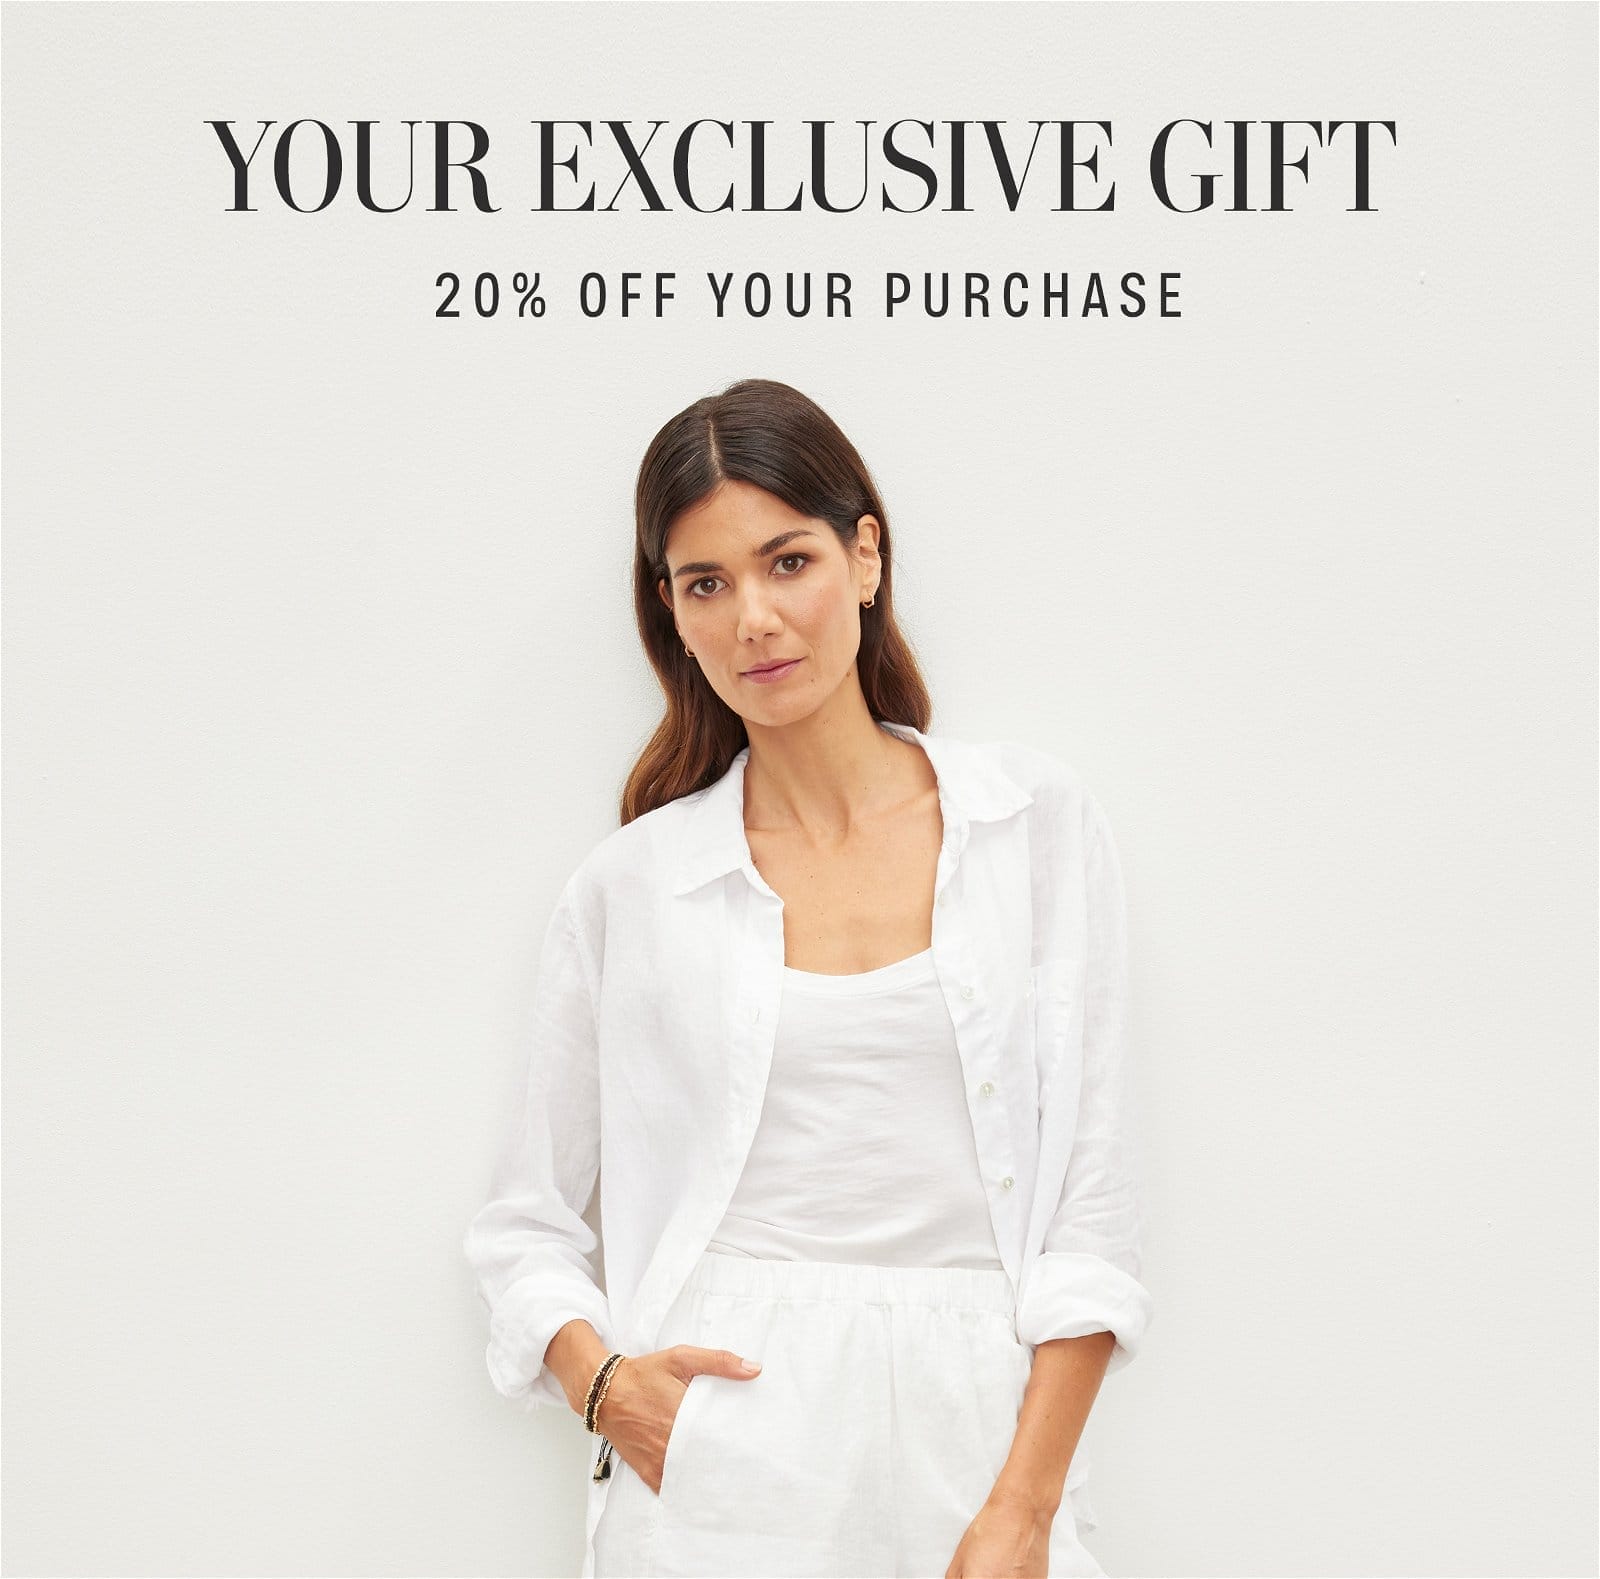 YOUR EXCLUSIVE GIFT. 20% OFF YOUR PURCHASE